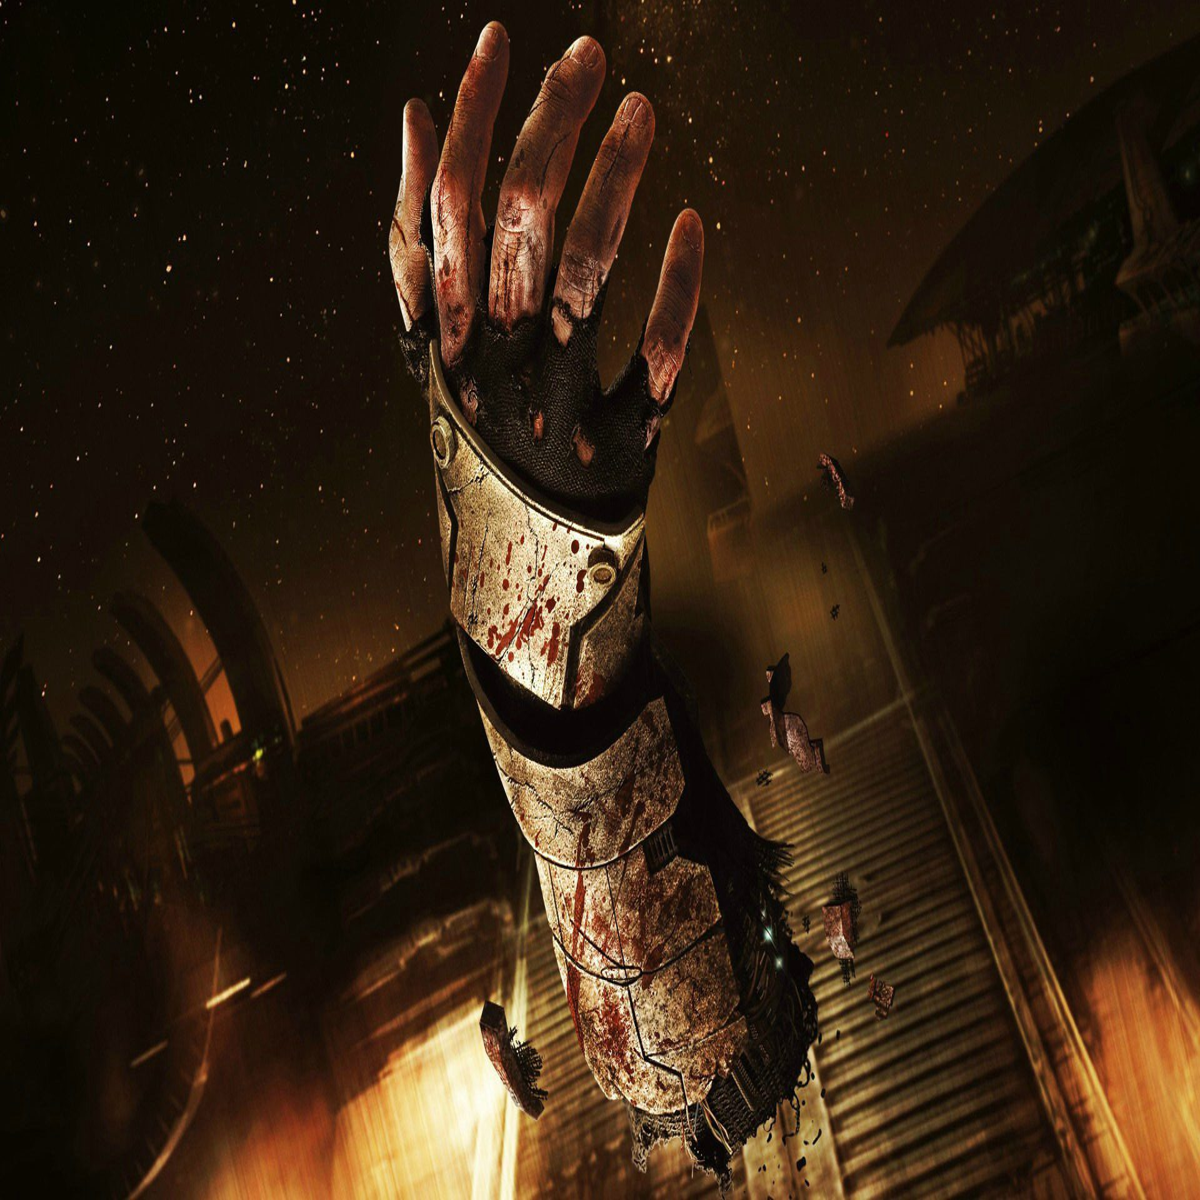 Dead Space remake pre-orders on Steam come with a free copy of